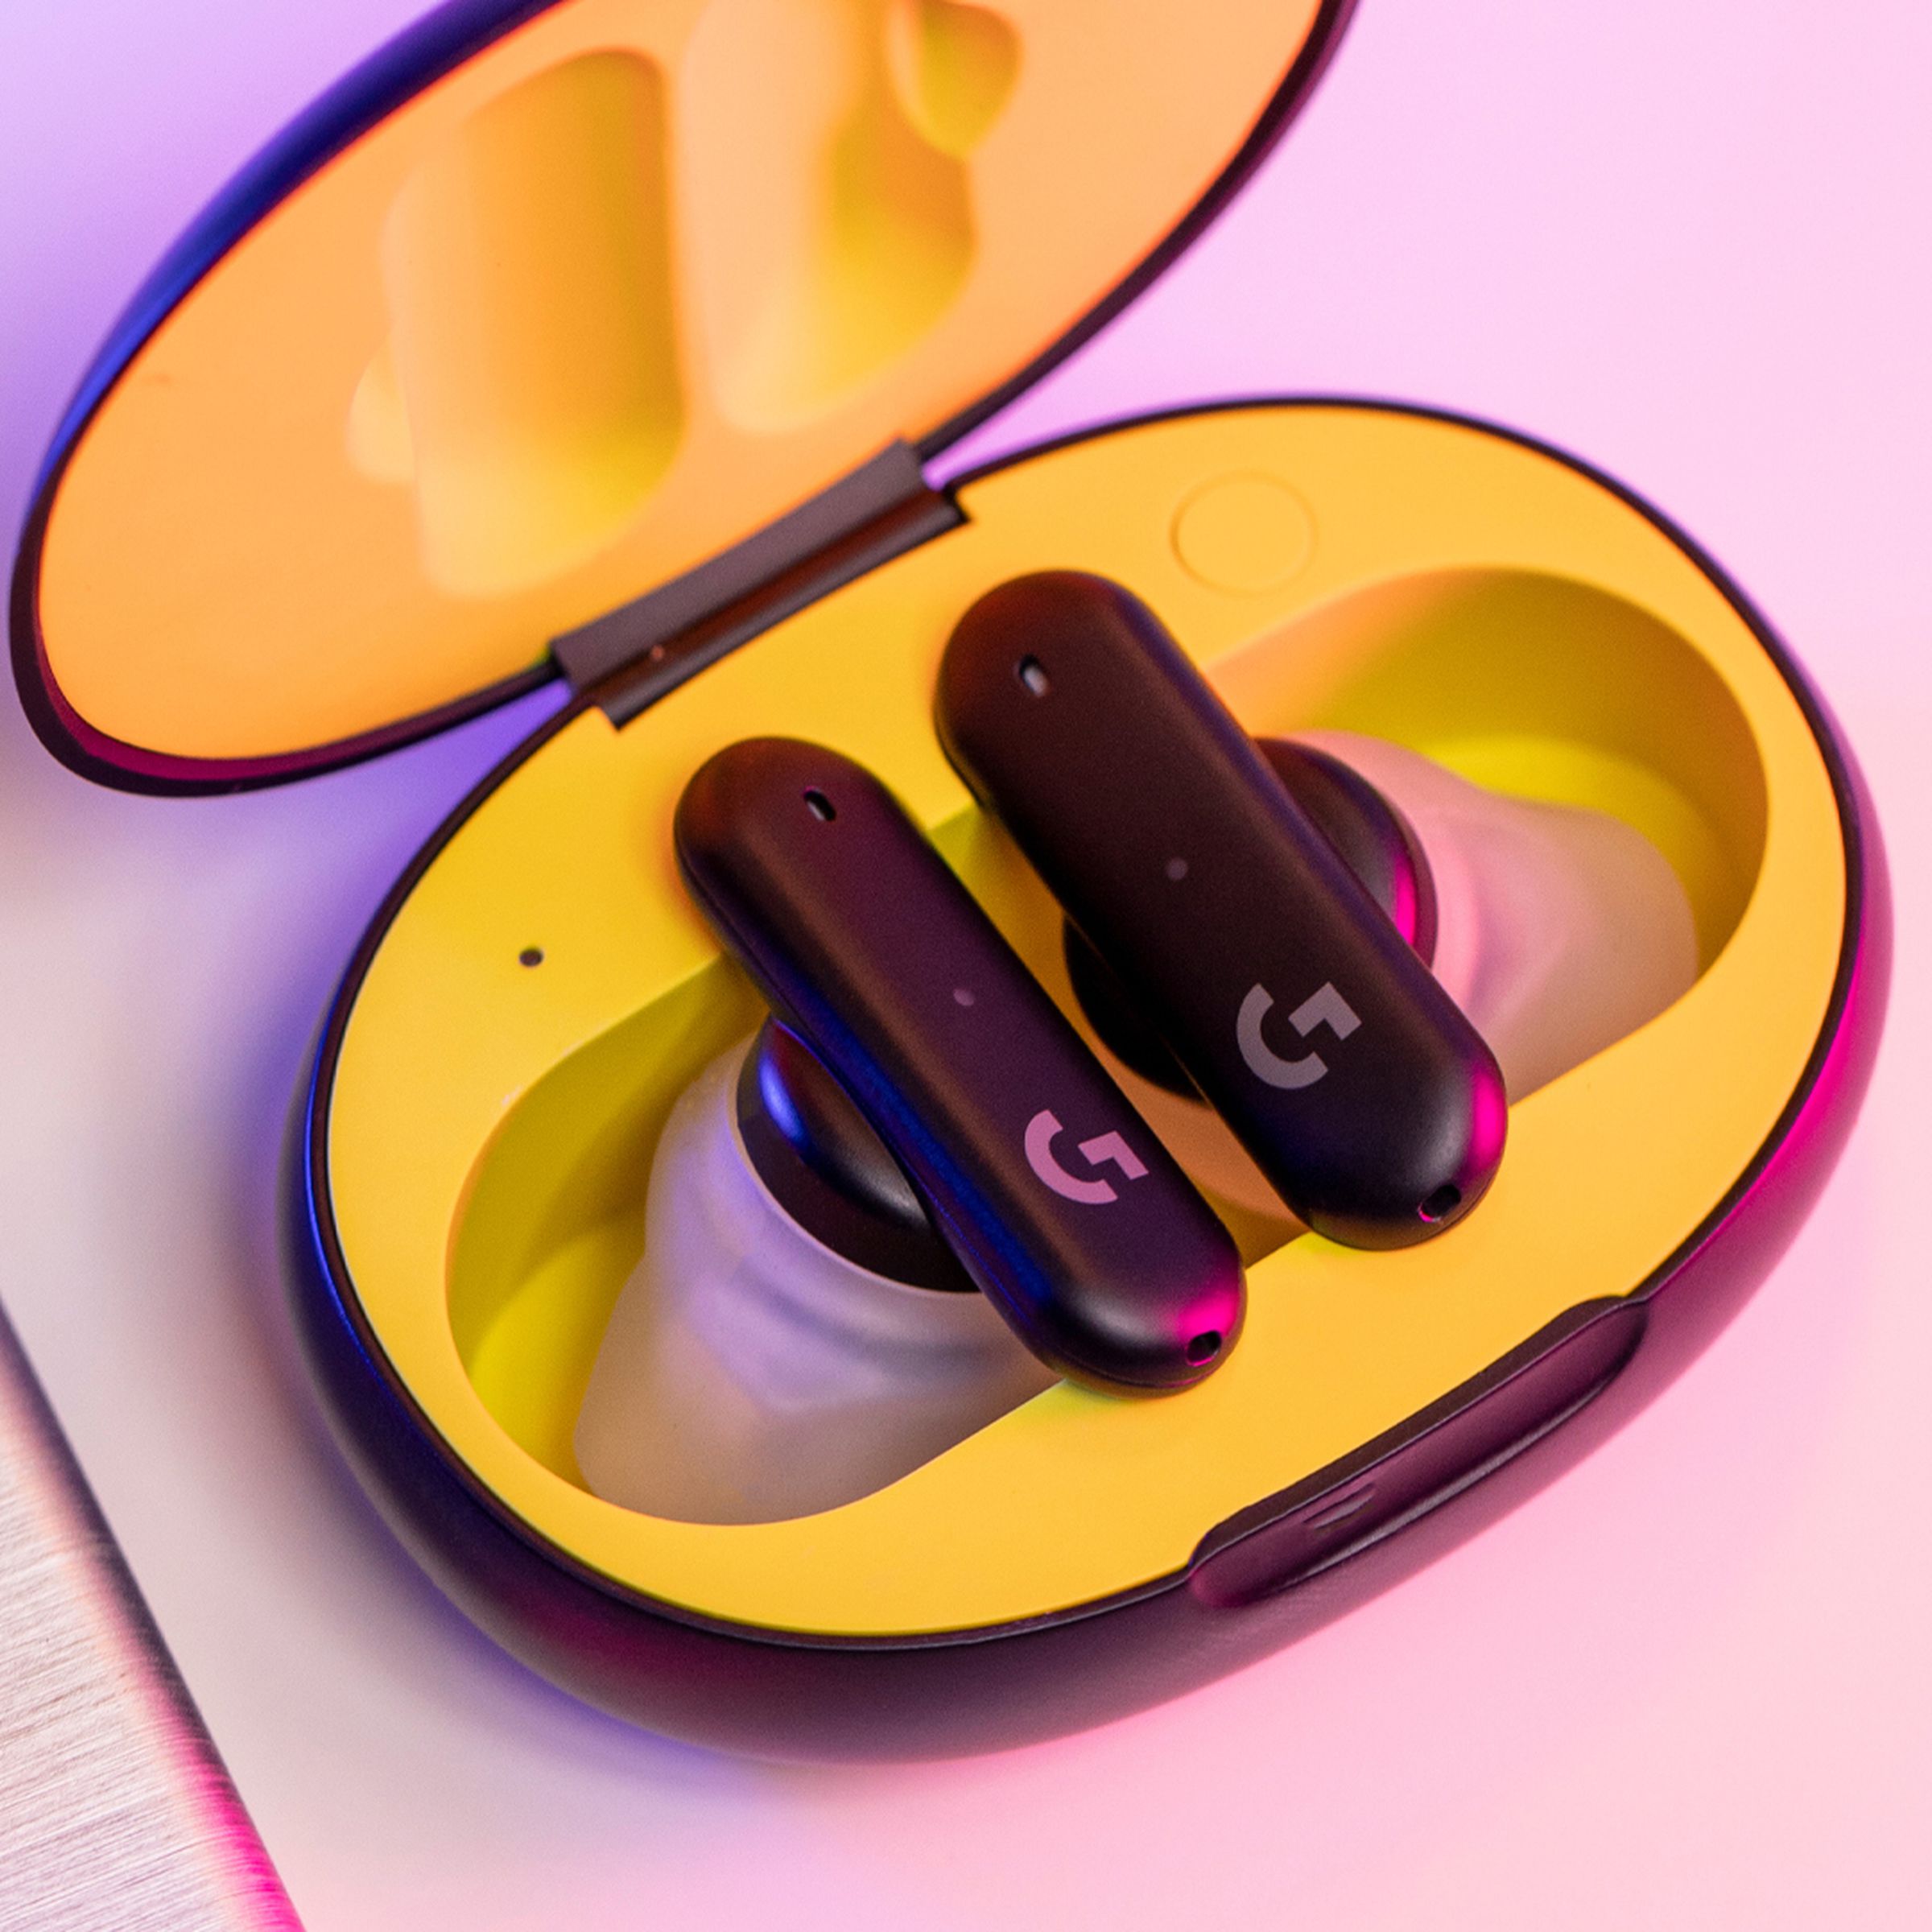 The Logitech G Fits wireless earbuds sitting in an opened yellow case.